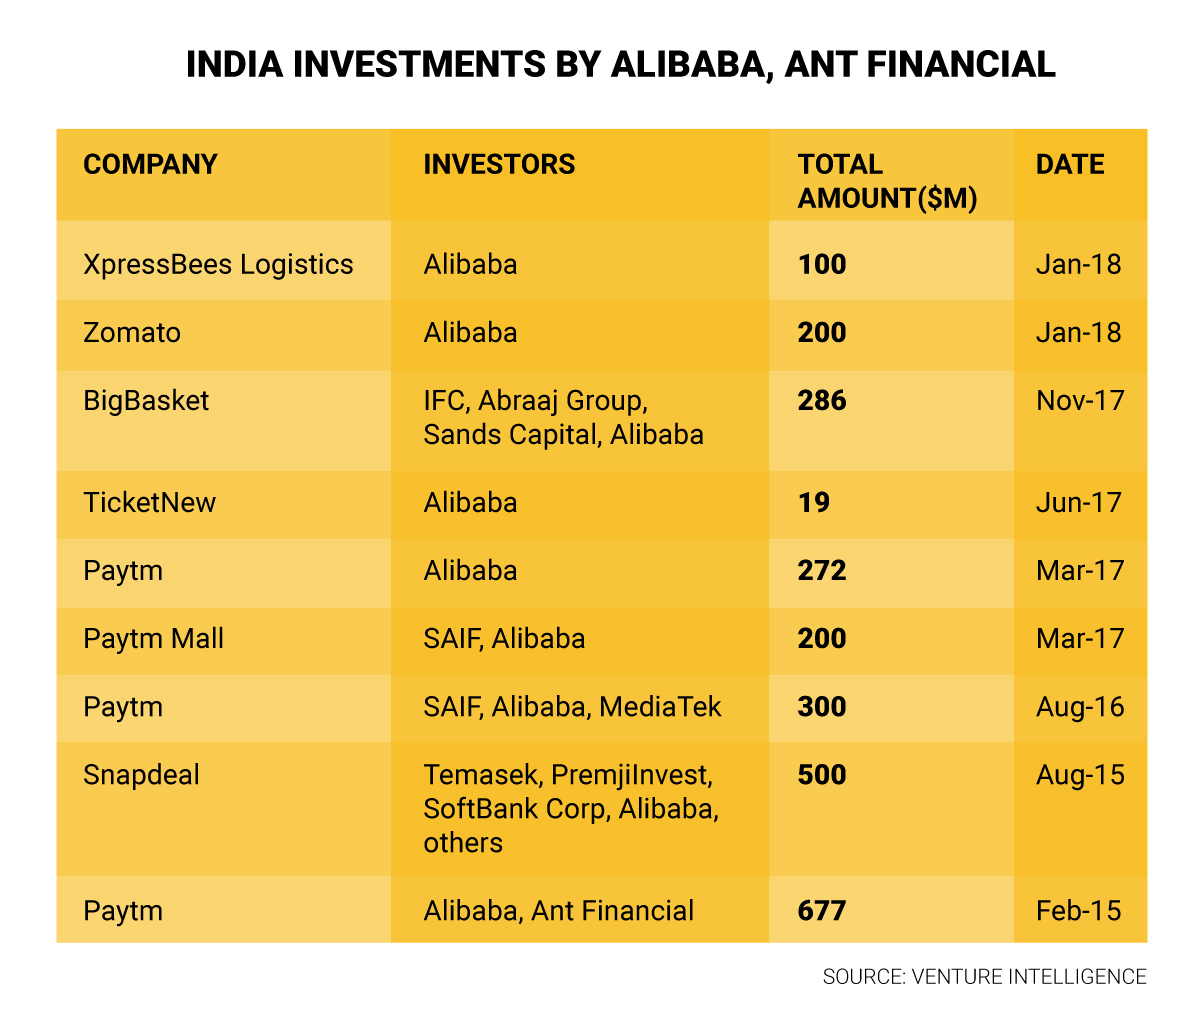 Alibaba has invested nearly $2 billion in Indian companies ranging from Paytm to Zomato.